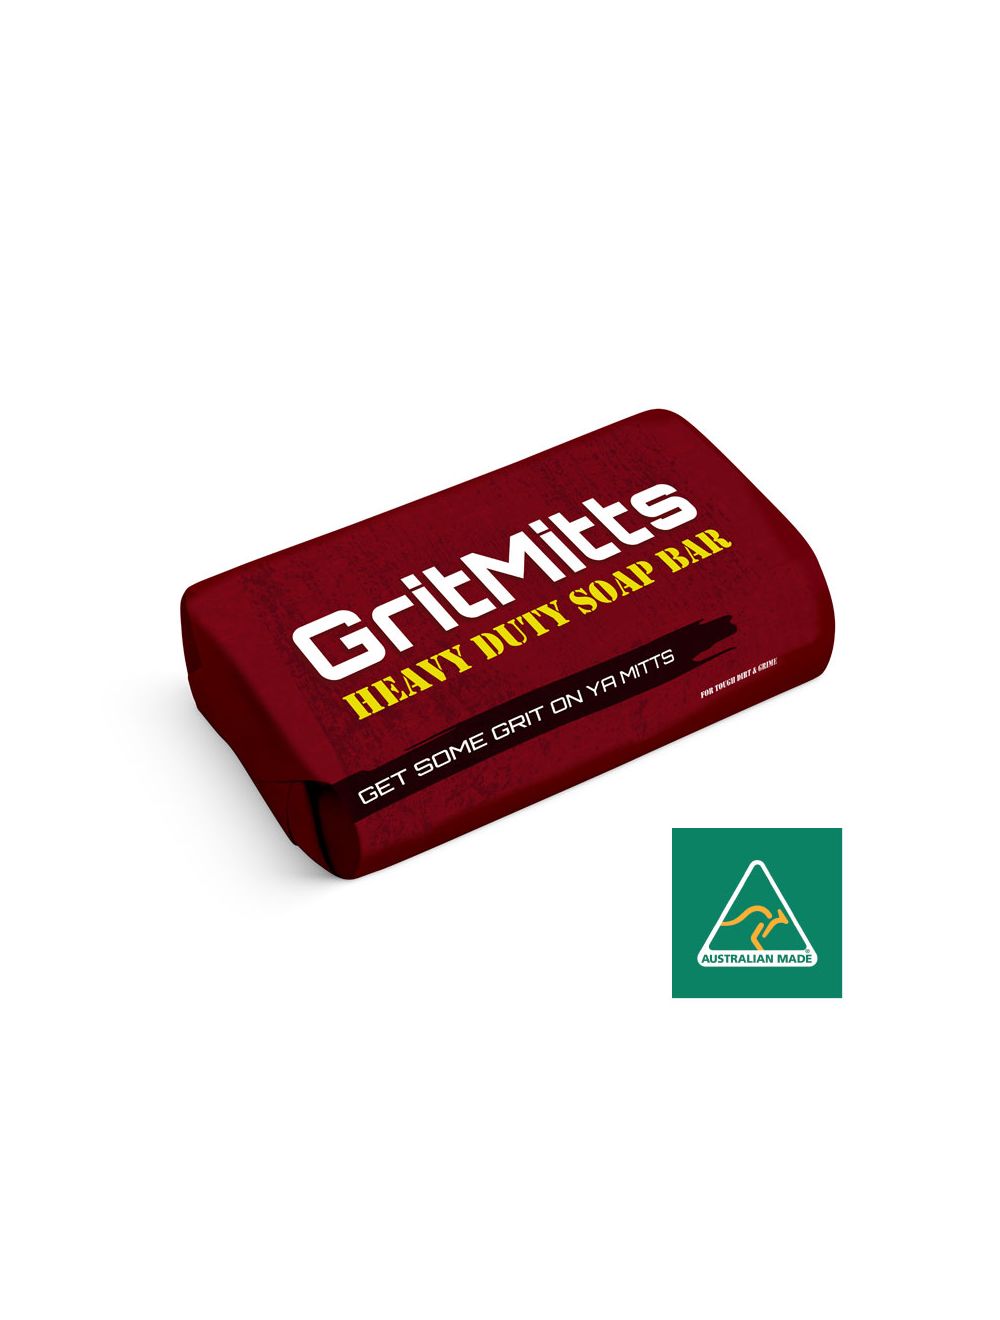 GritMitts Liquid, Heavy-duty Grit Hand Cleaner